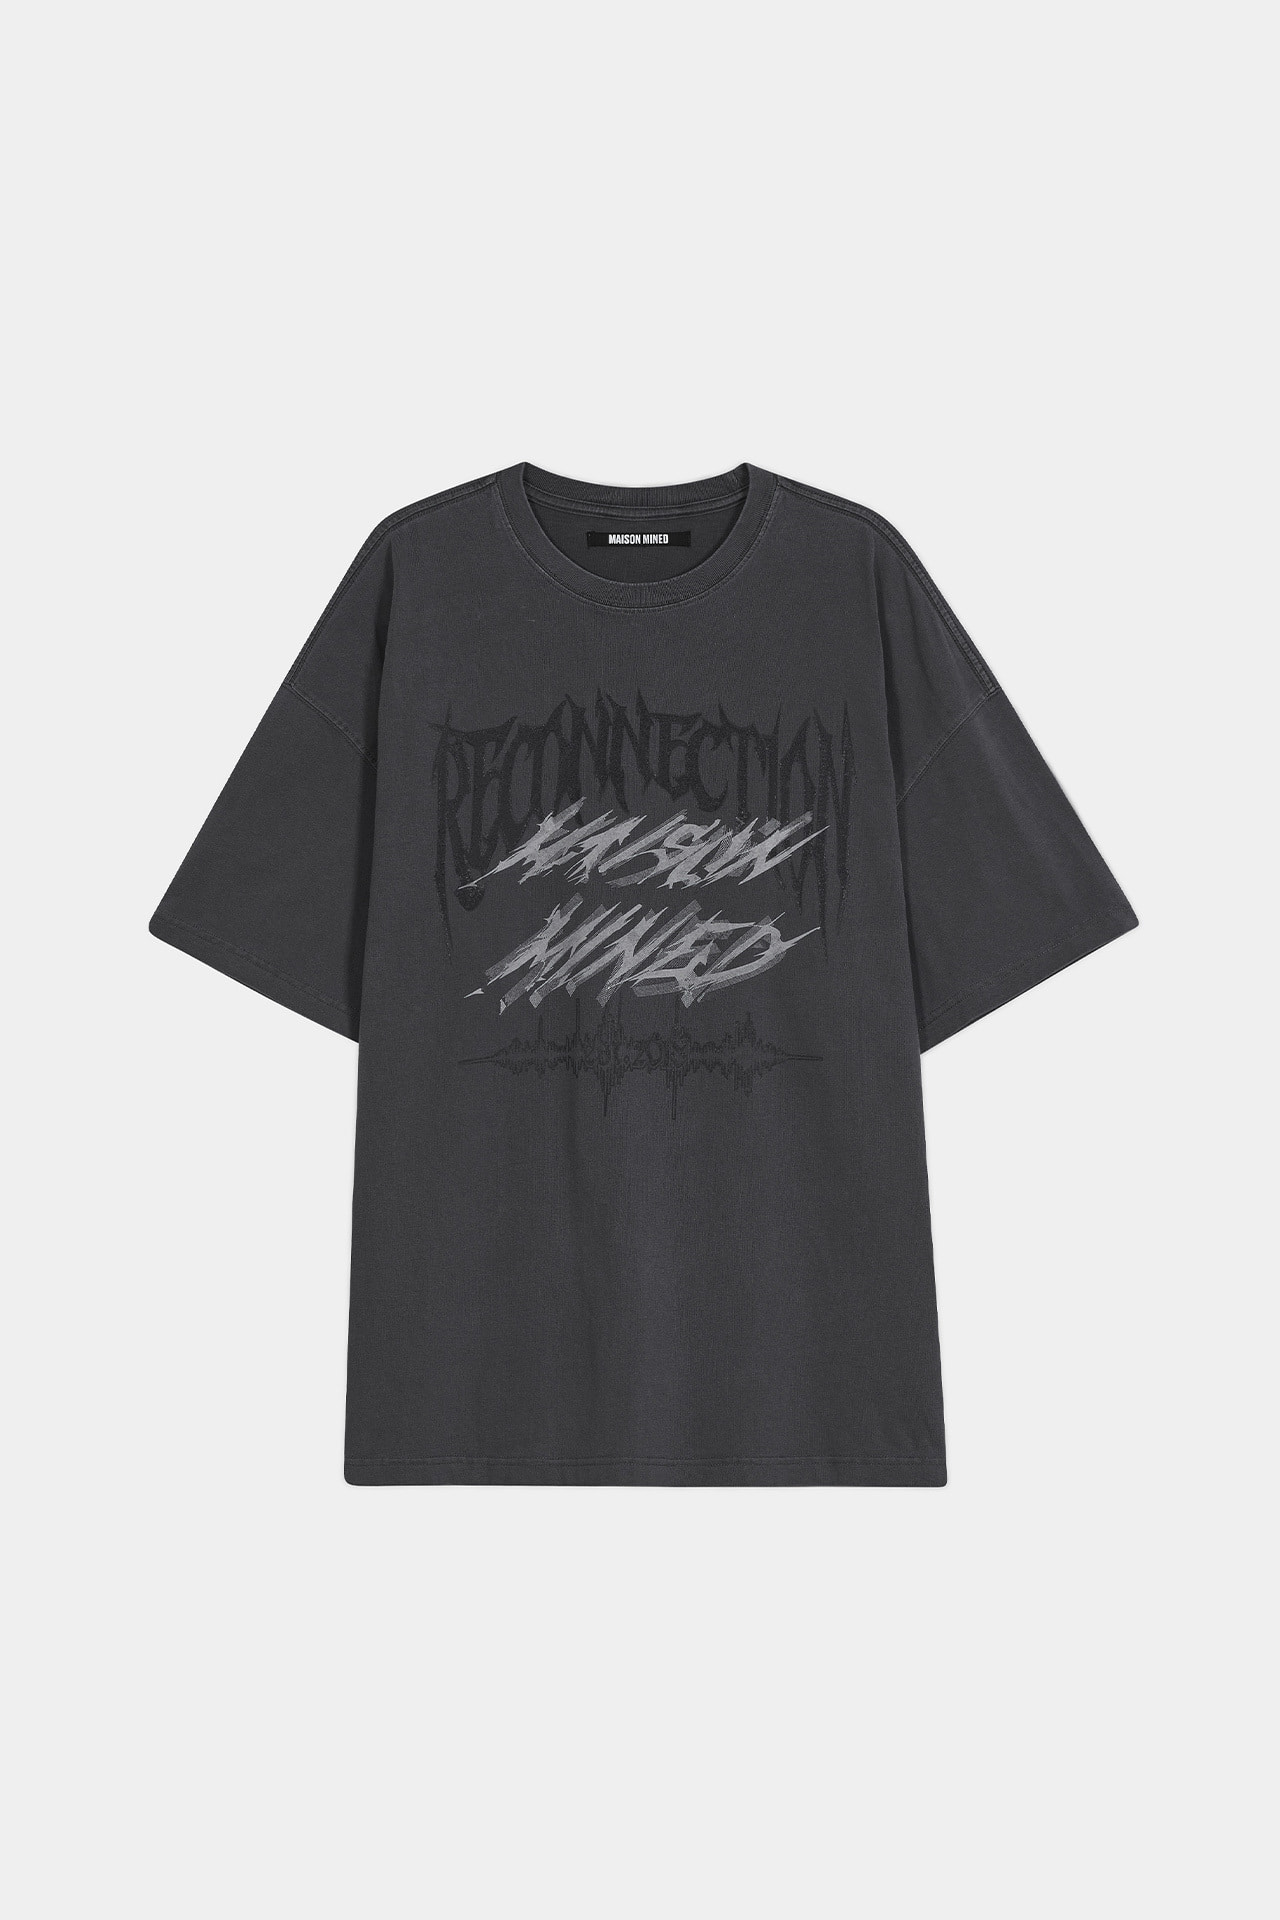 DECAY WASHED HALF T CHARCOAL메종미네드 MAISON MINED 메종미네드